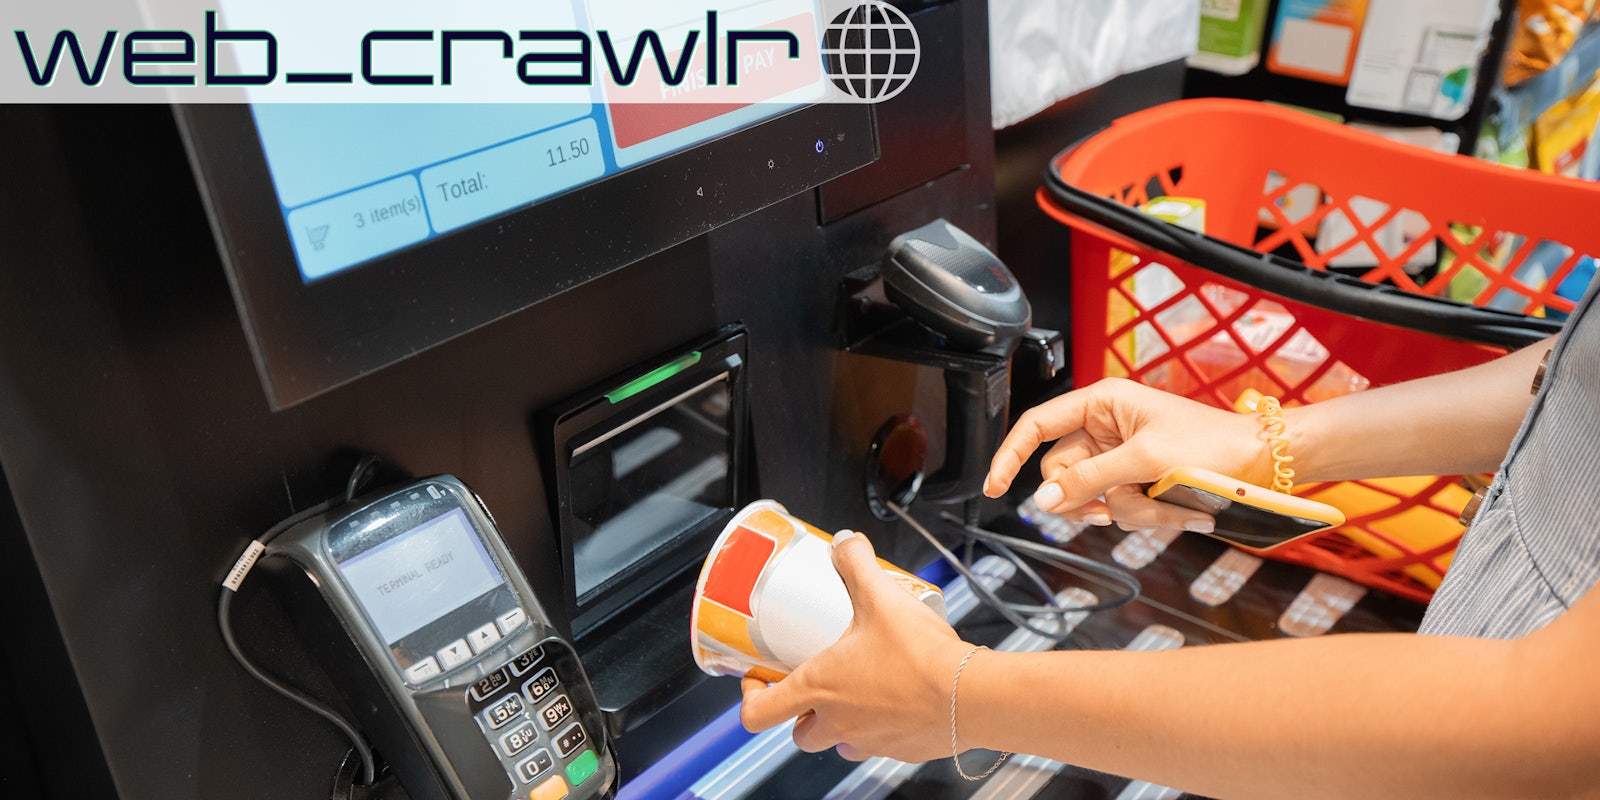 A person using a self checkout. The Daily Dot newsletter web_crawlr logo is in the top left corner.